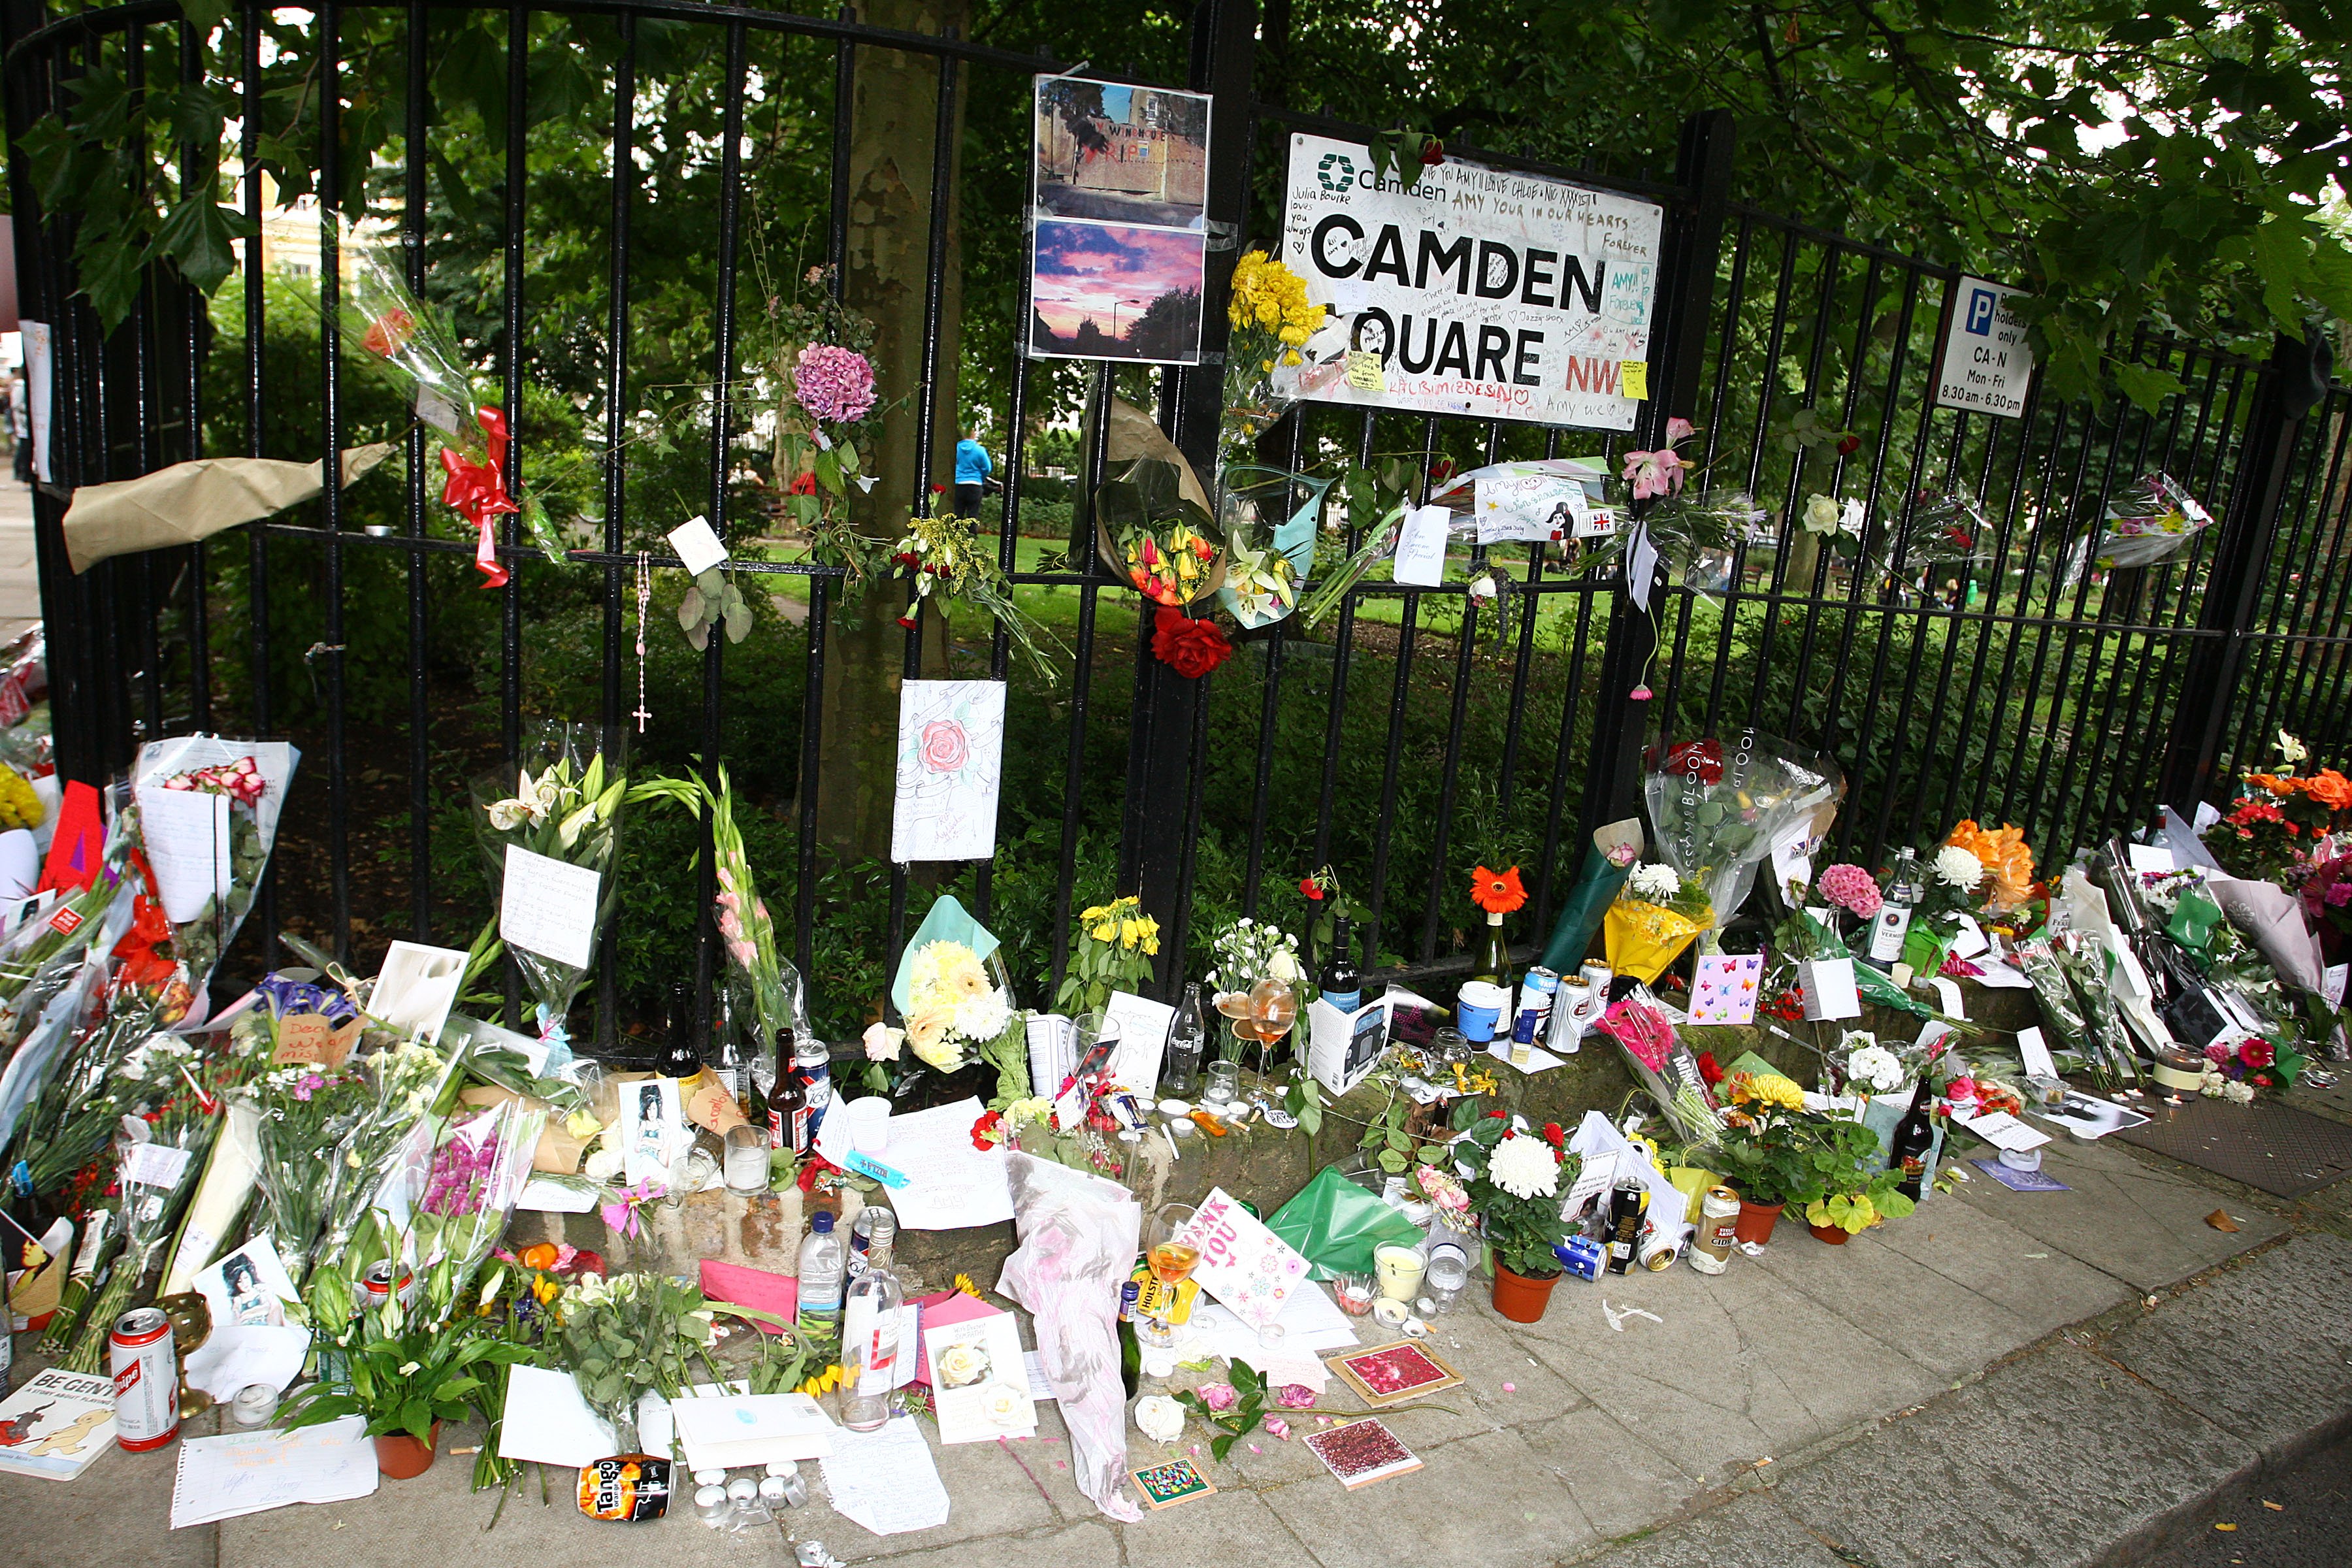 Tributes left at Amy Winehouse's home in Camden Square on July 26, 2011 | Photo: Getty Images